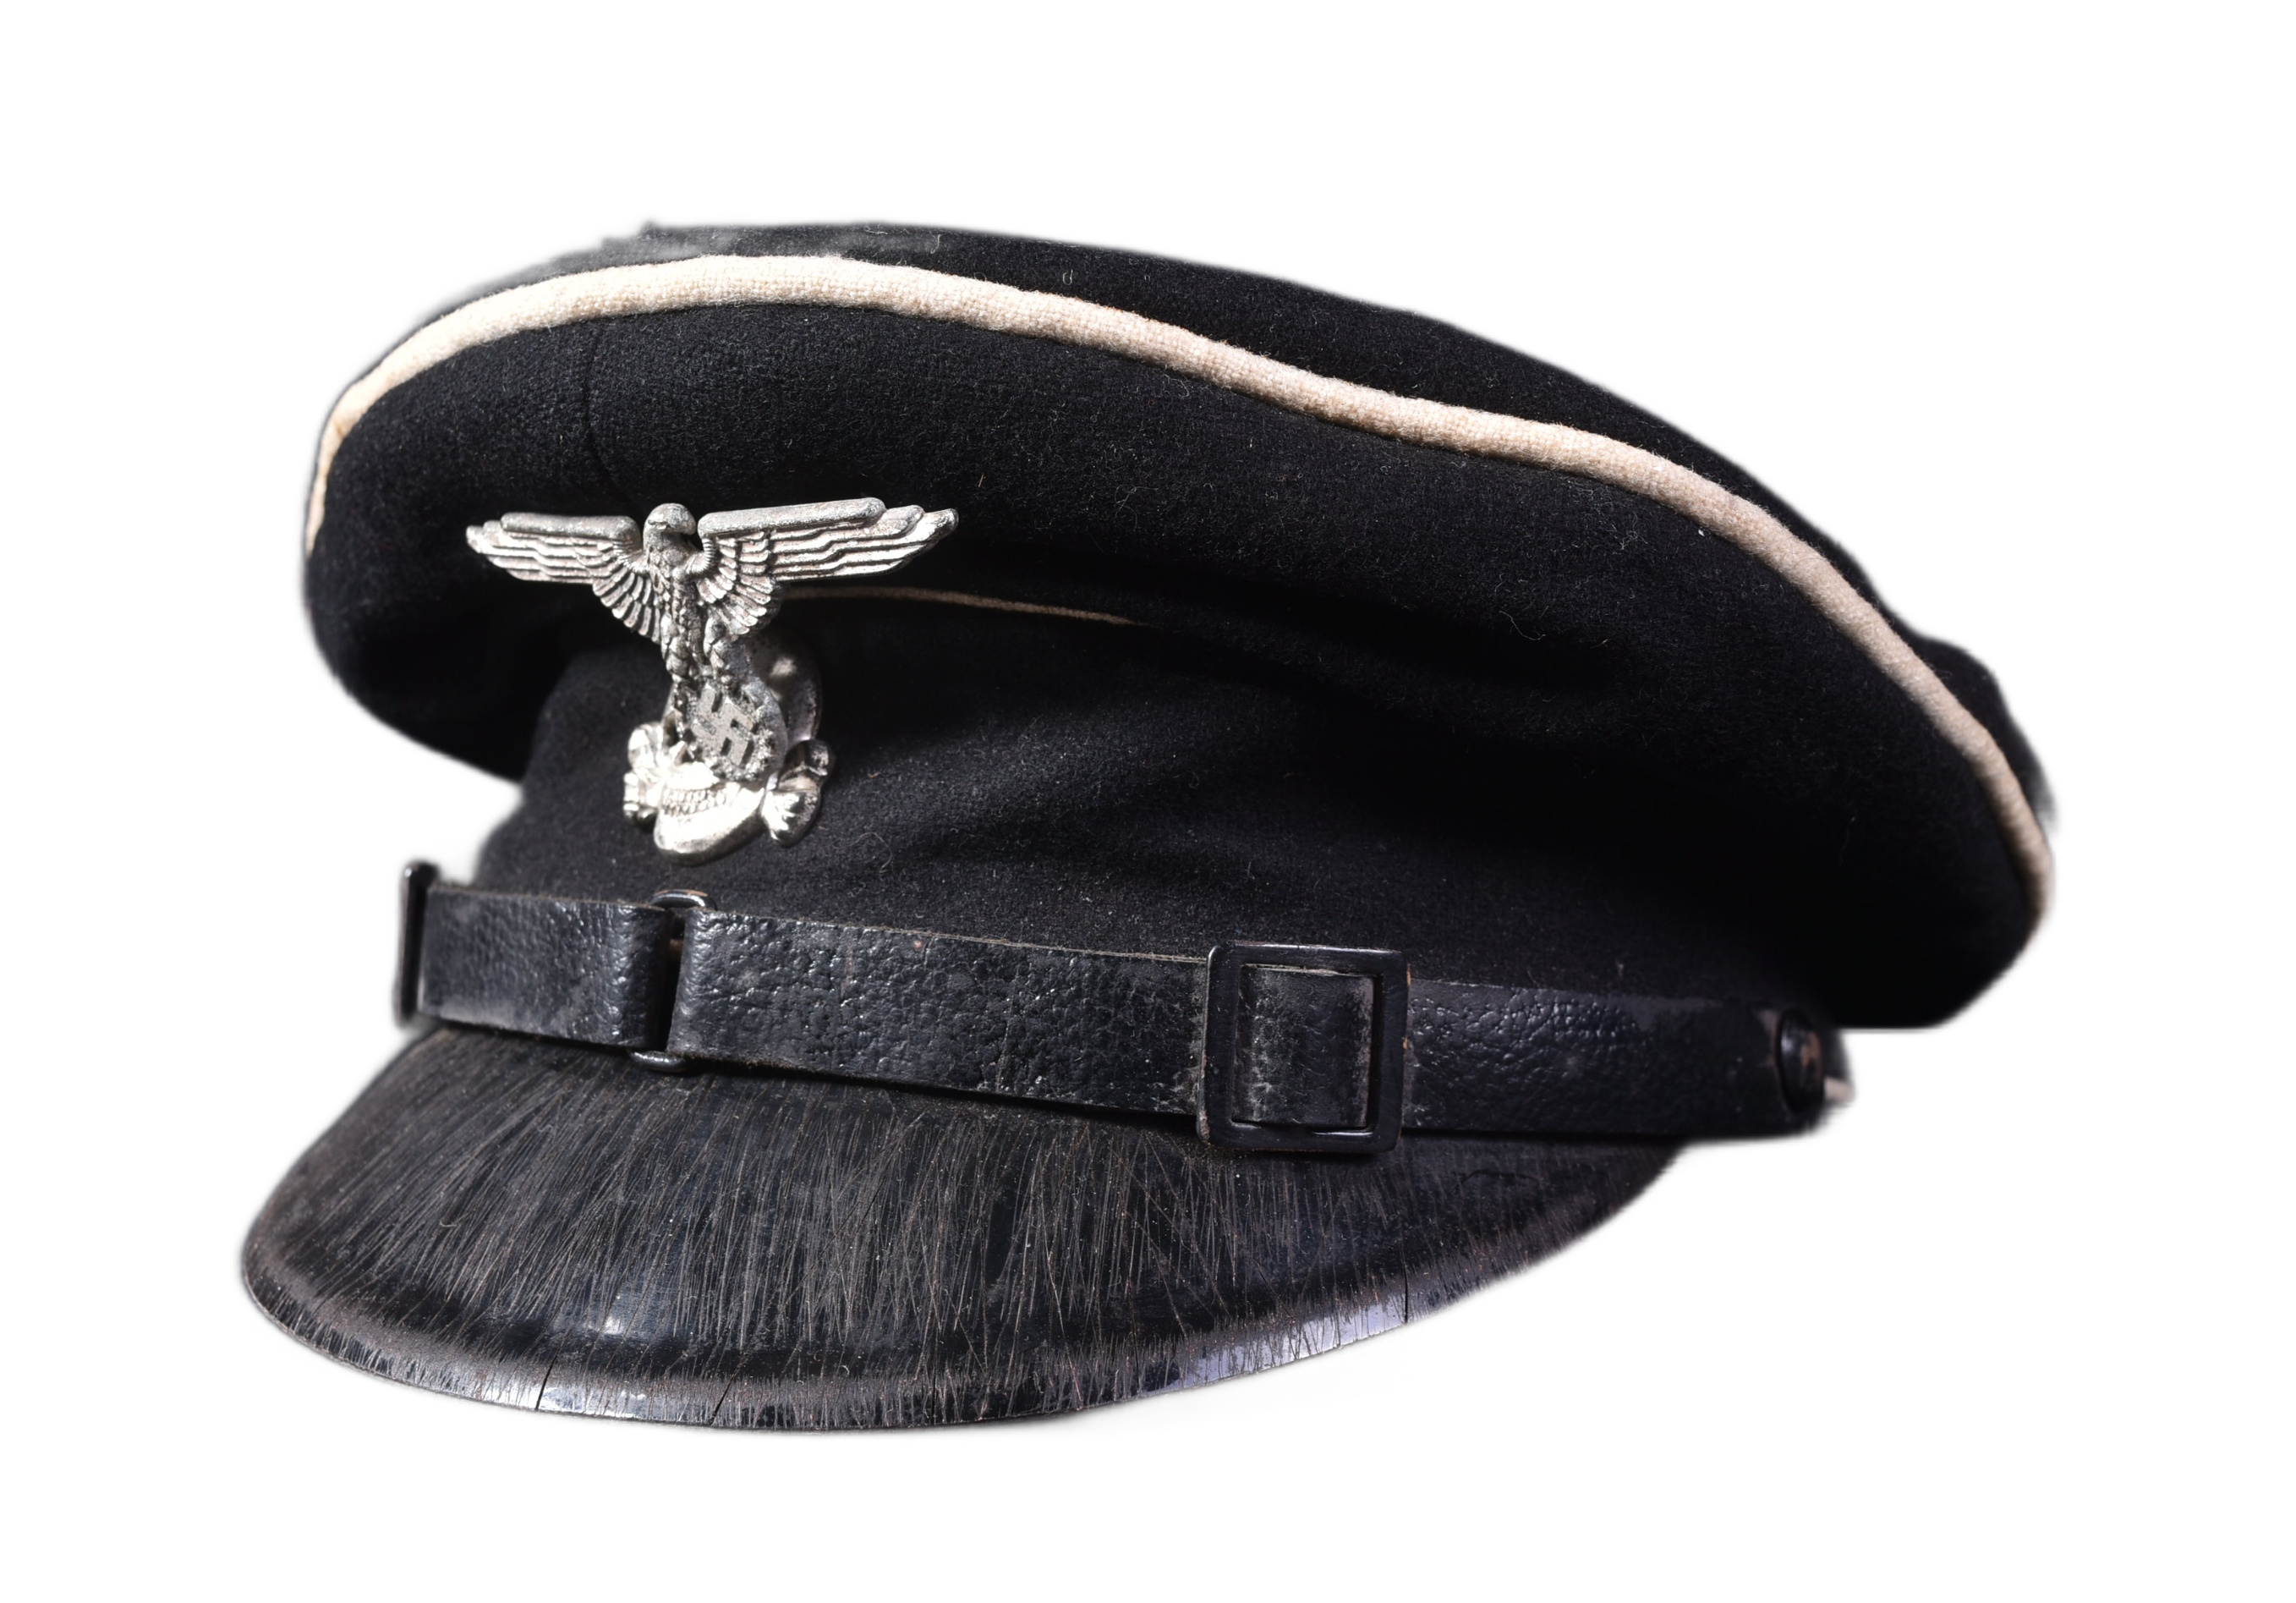 WWII SECOND WORLD WAR GERMAN THIRD REICH SS OFFICERS CAP - Image 2 of 8